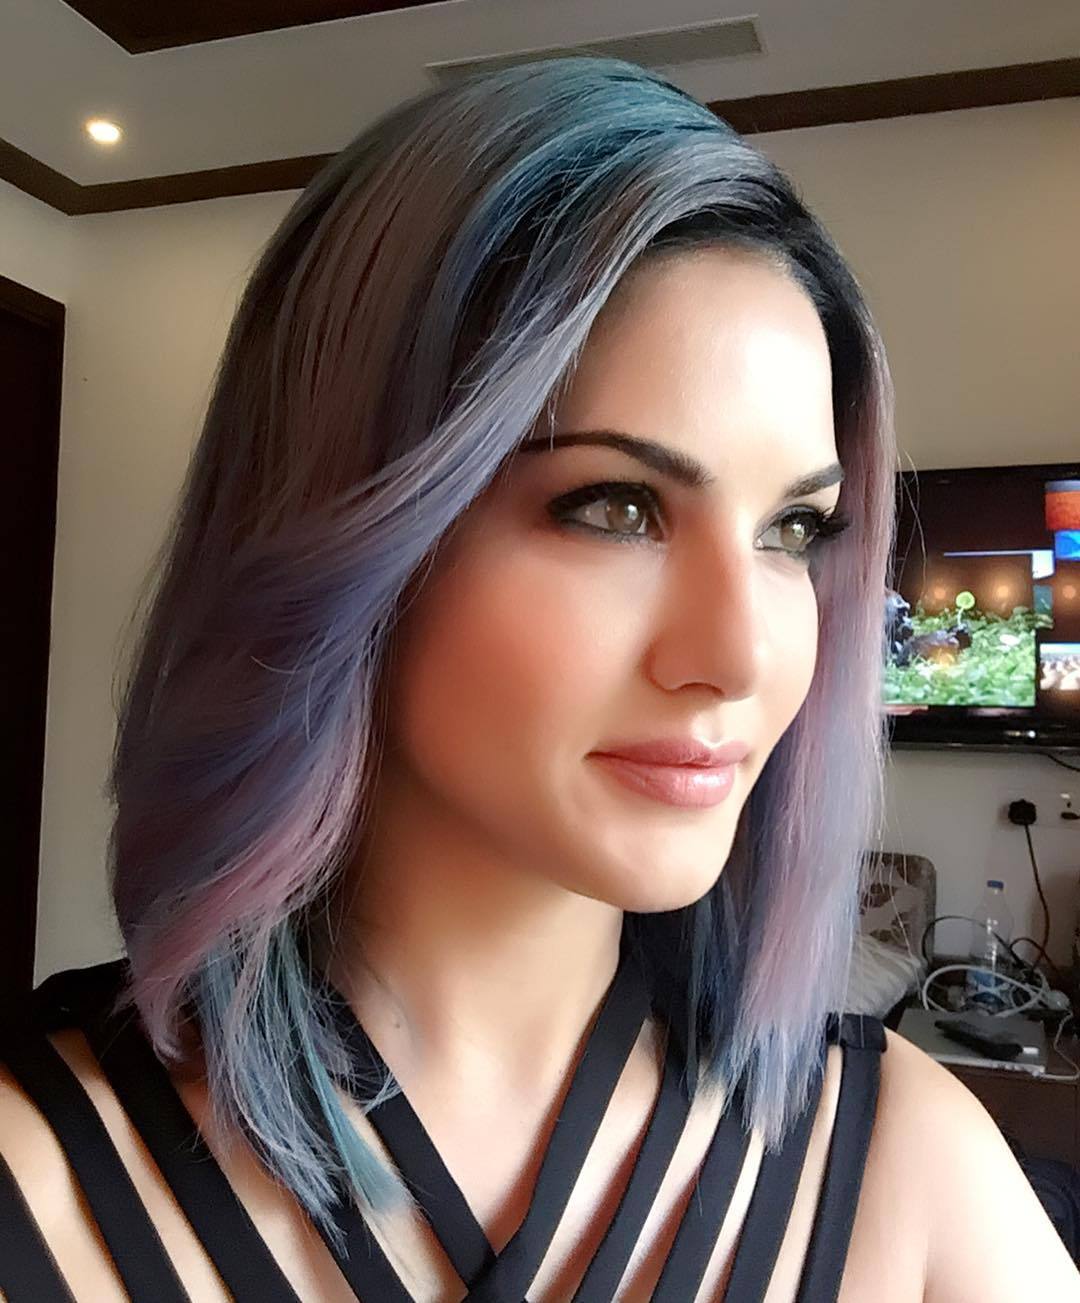 My hair is officially blue/purple today! Hair by @tomasmoucka and make up by @nina_sagri